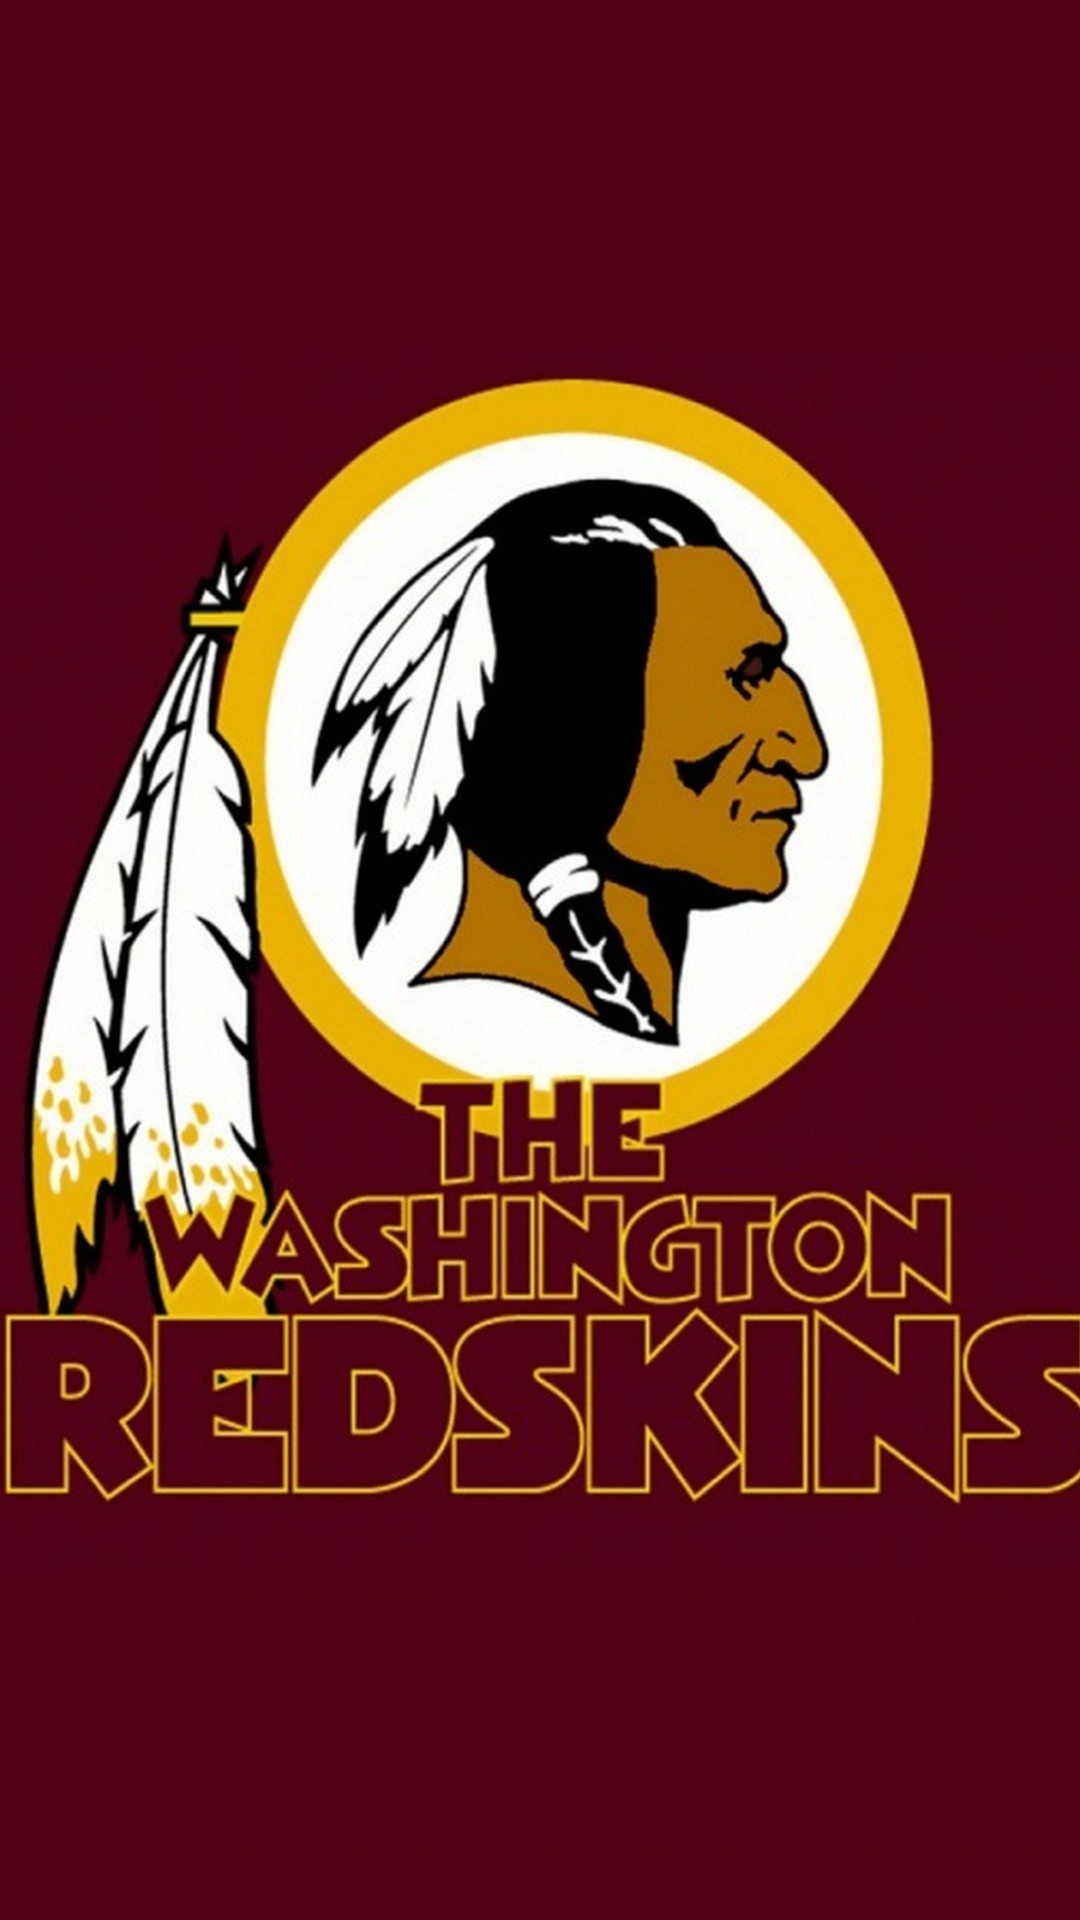 Washington Redskins iPhone Screen Lock Wallpaper With high-resolution 1080X1920 pixel. Download and set as wallpaper for Desktop Computer, Apple iPhone X, XS Max, XR, 8, 7, 6, SE, iPad, Android